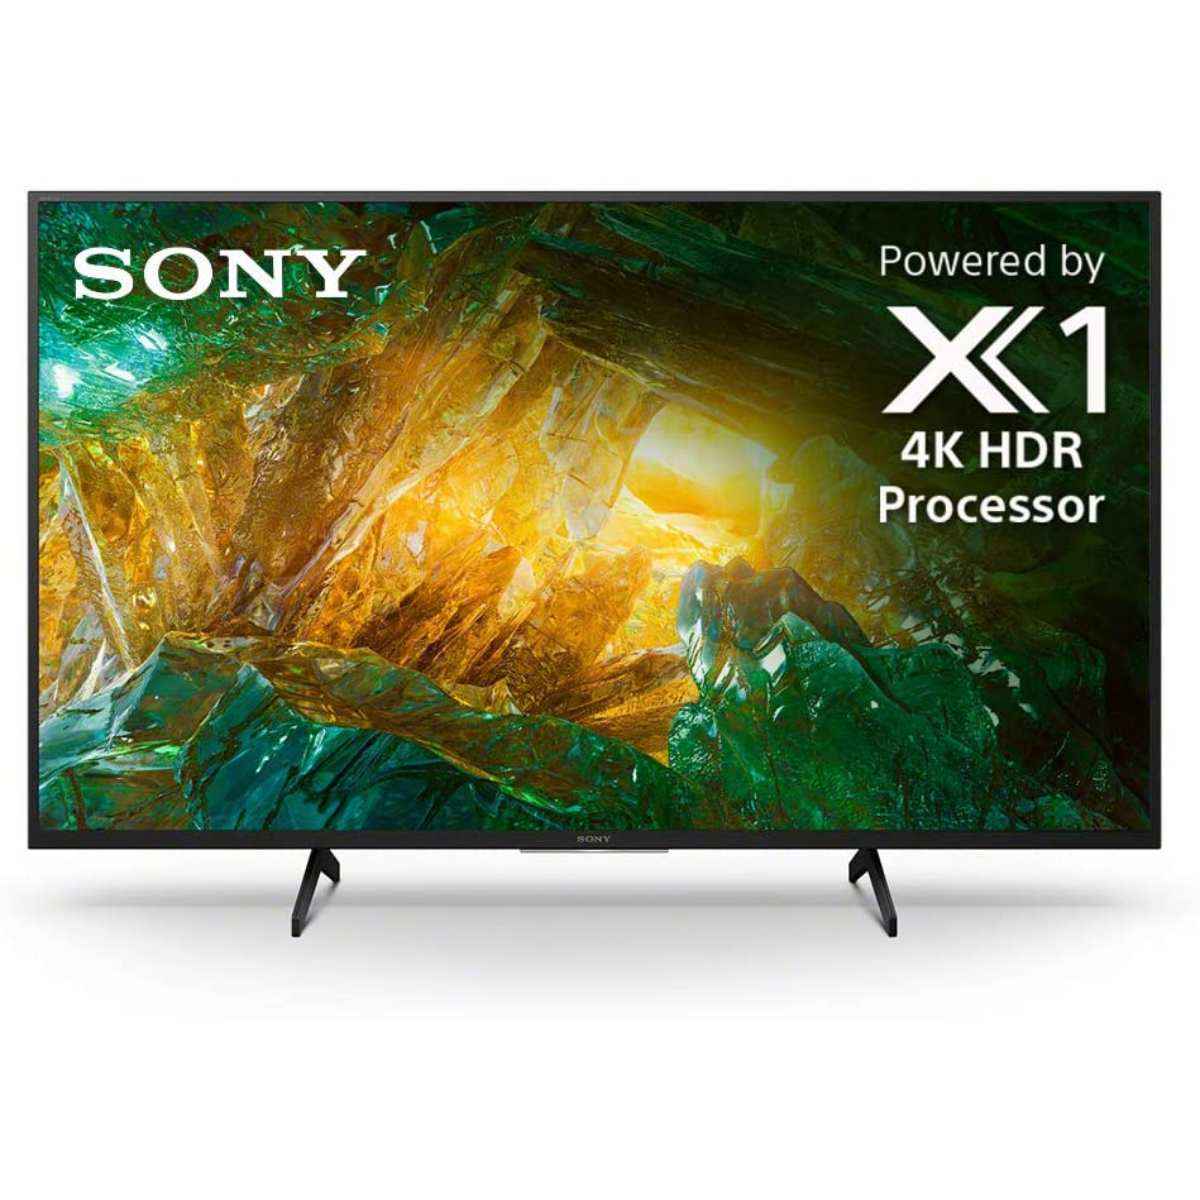 Sony 43 inch 4K ULTRA HD ANDROID SMART TV (KD-43X8000H)